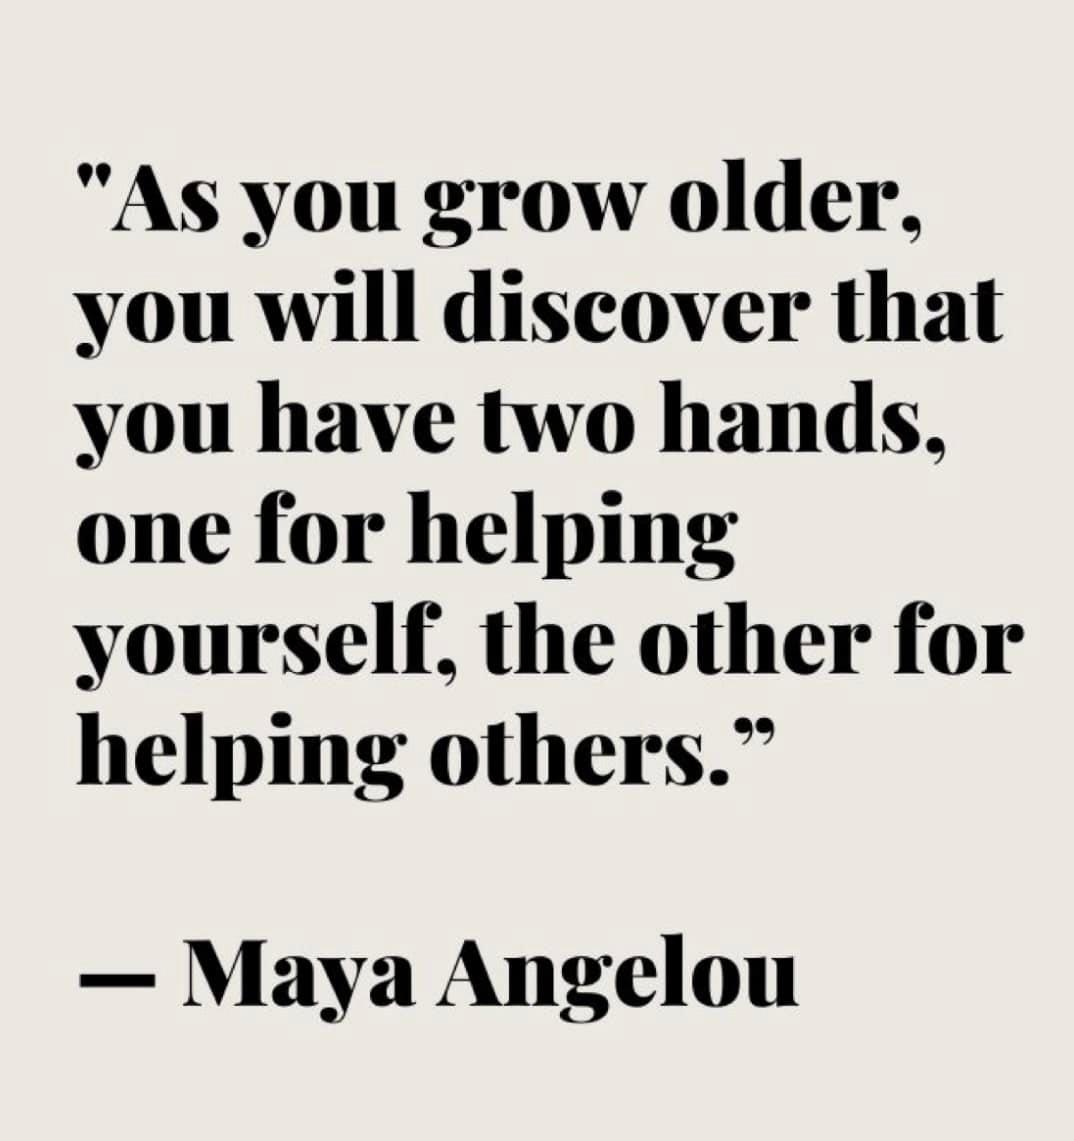 Inspirational quote from Maya Angelou